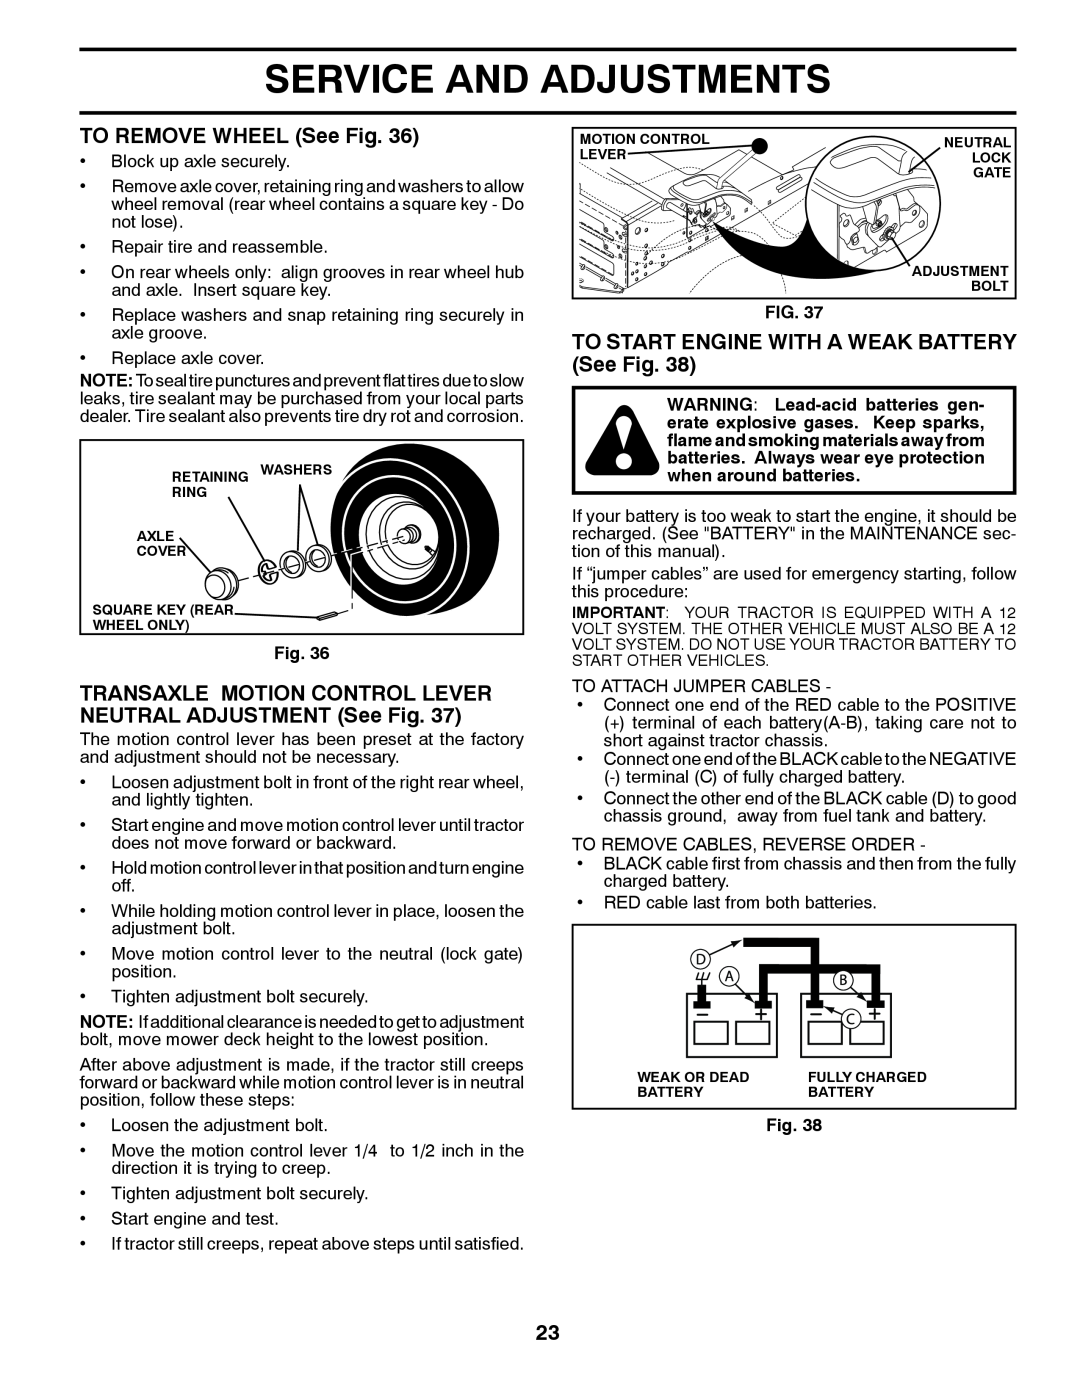 Husqvarna 03002, 96045001700 owner manual TO REMOVE WHEEL See Fig, TRANSAXLE MOTION CONTROL LEVER NEUTRAL ADJUSTMENT See Fig 